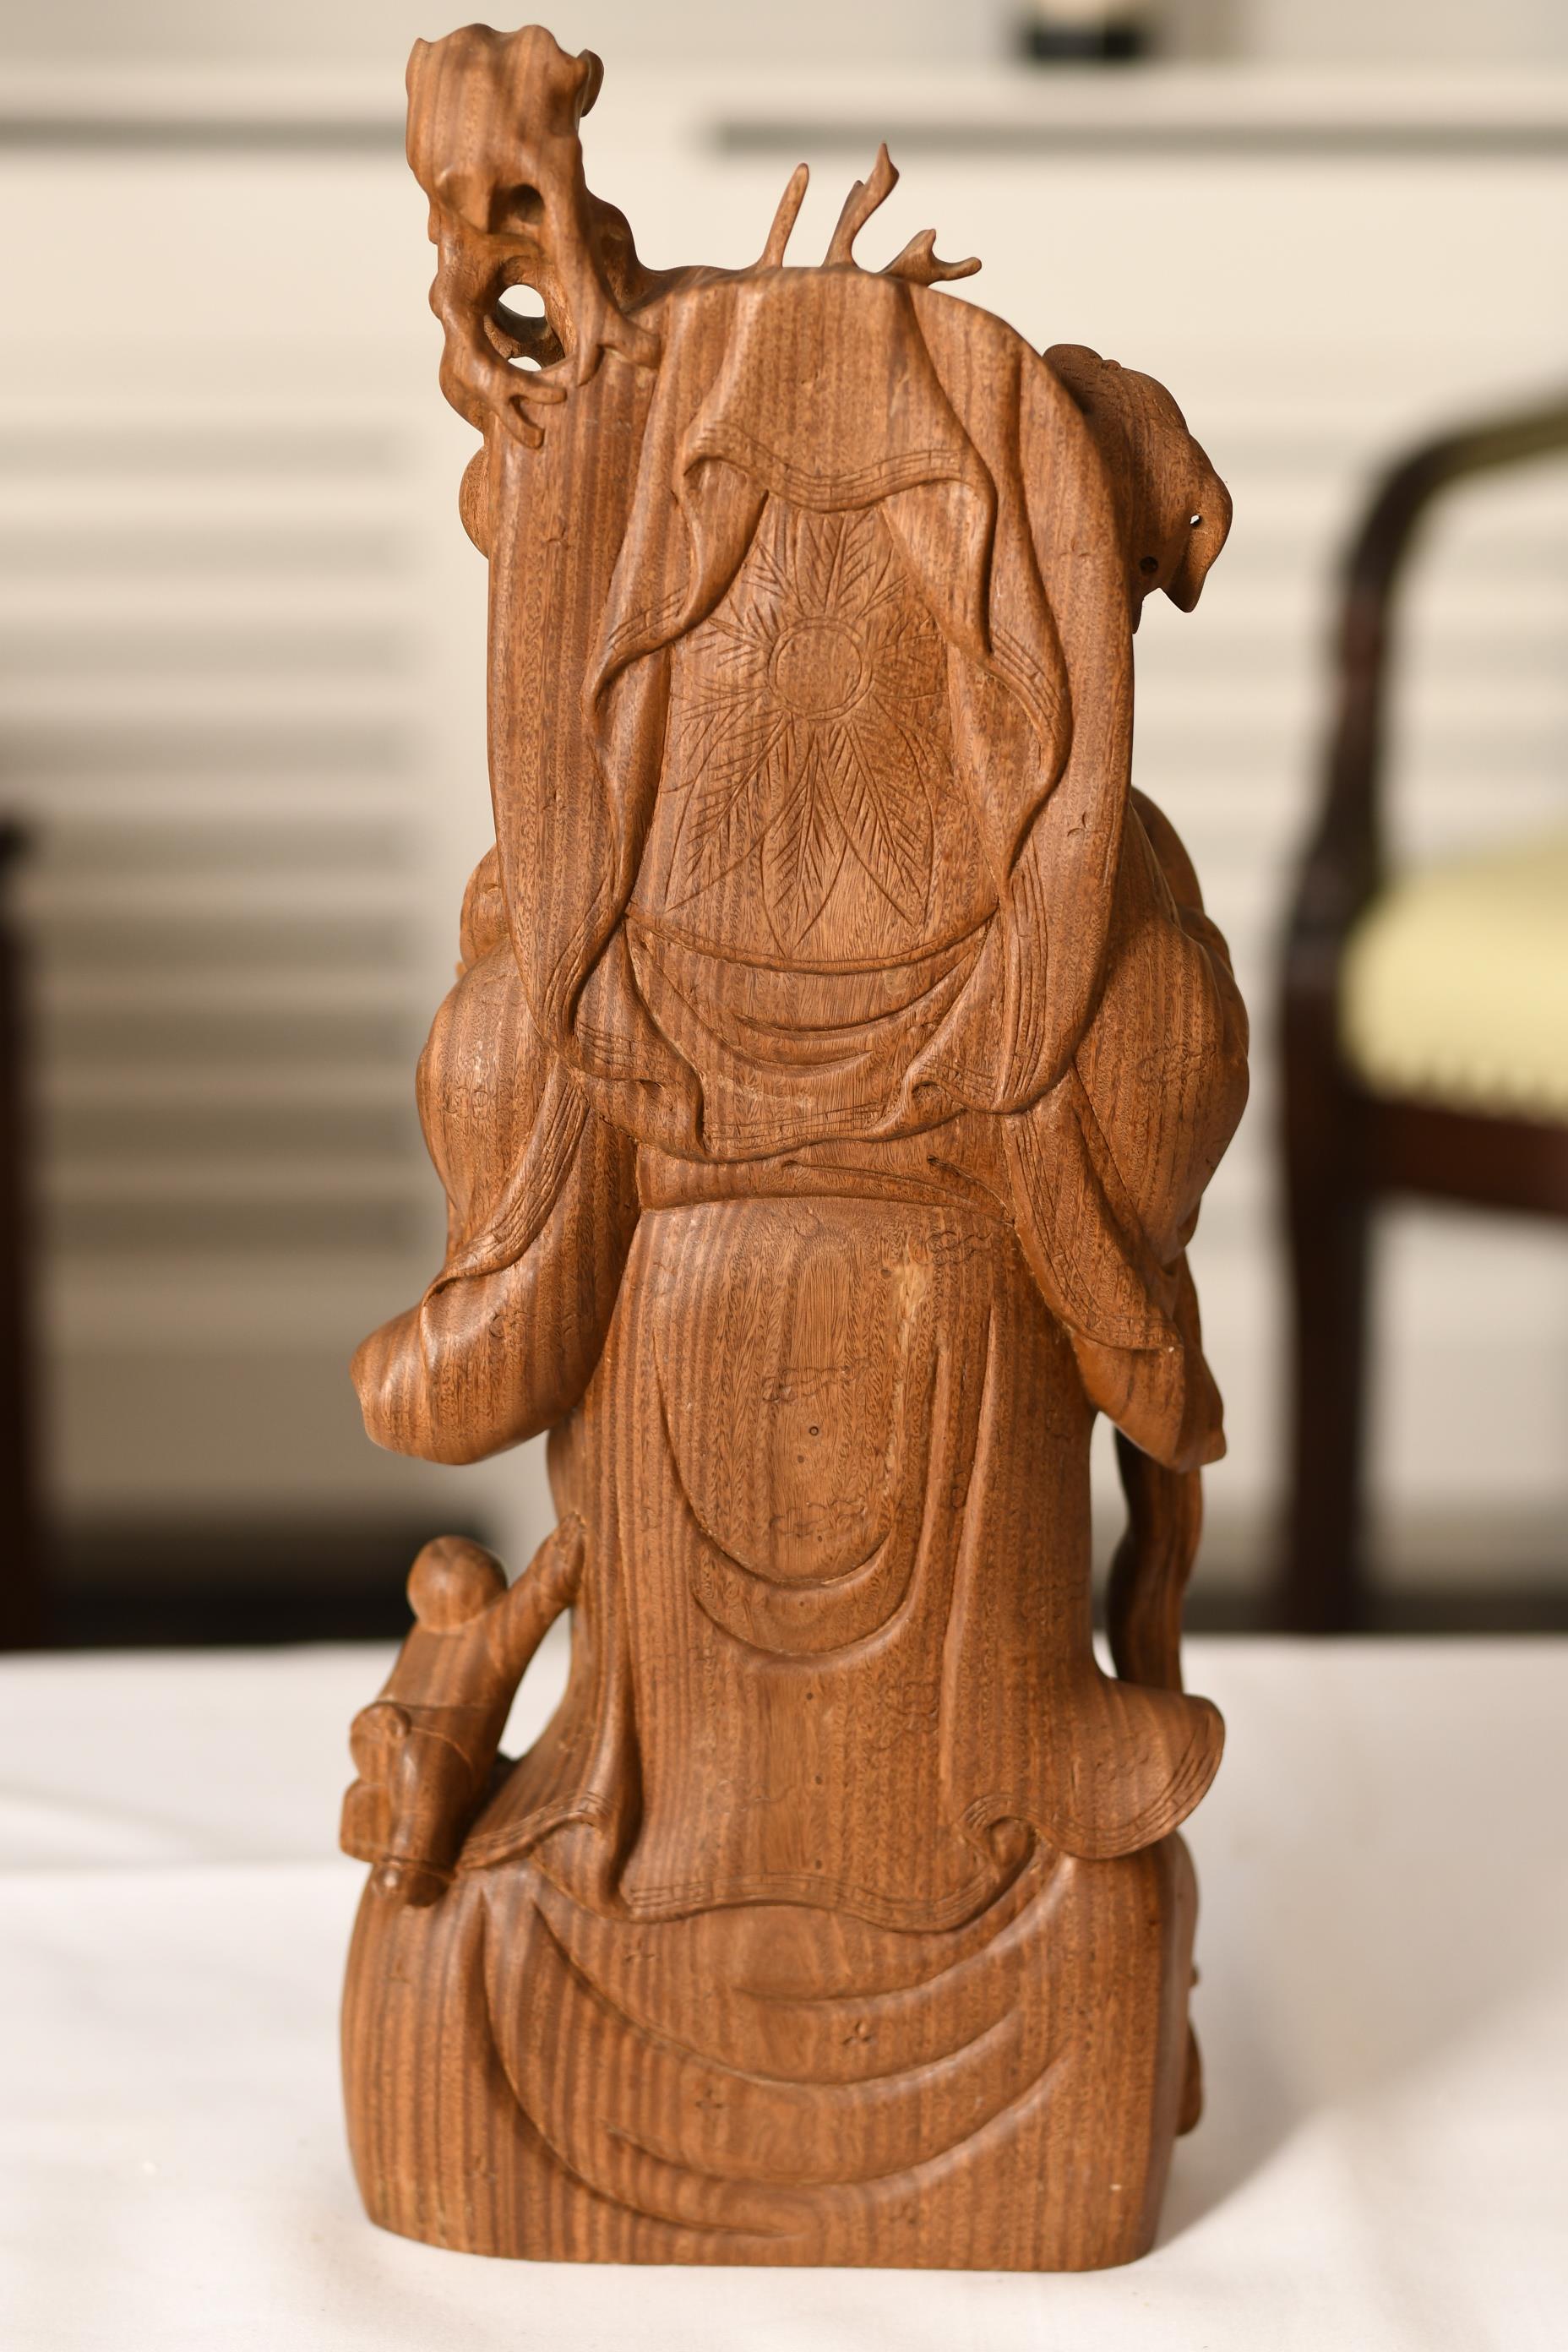 Wood Carving - Image 5 of 7